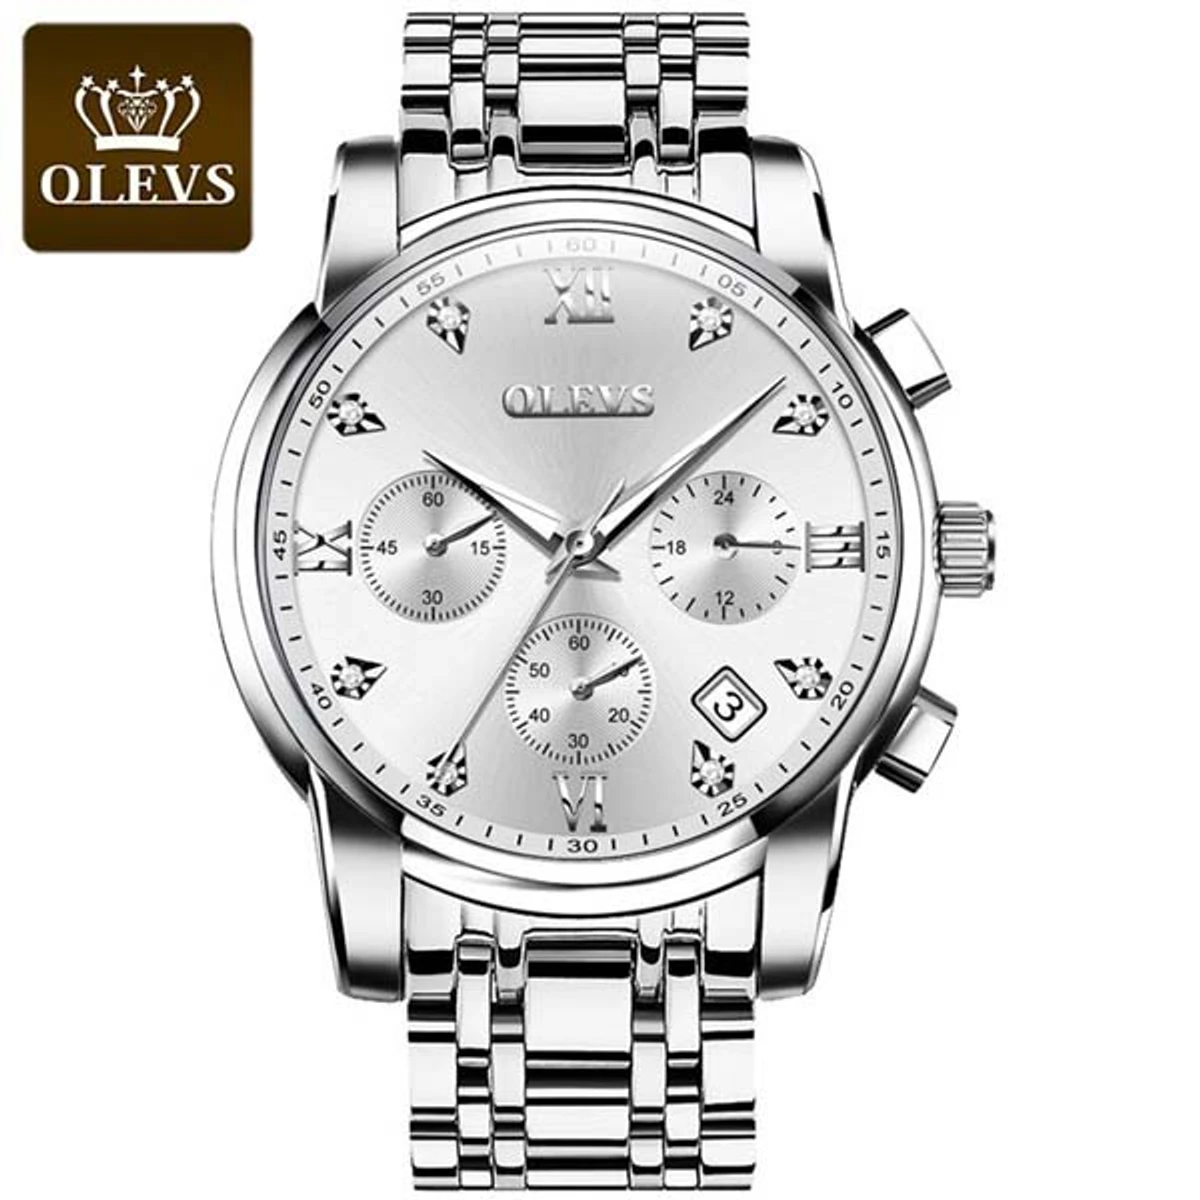 OLEVS MODEL 2858 Watch for Men Stainless Steel Watches - 2858 Full SILVER COOLER WATCH - MAN WATCH